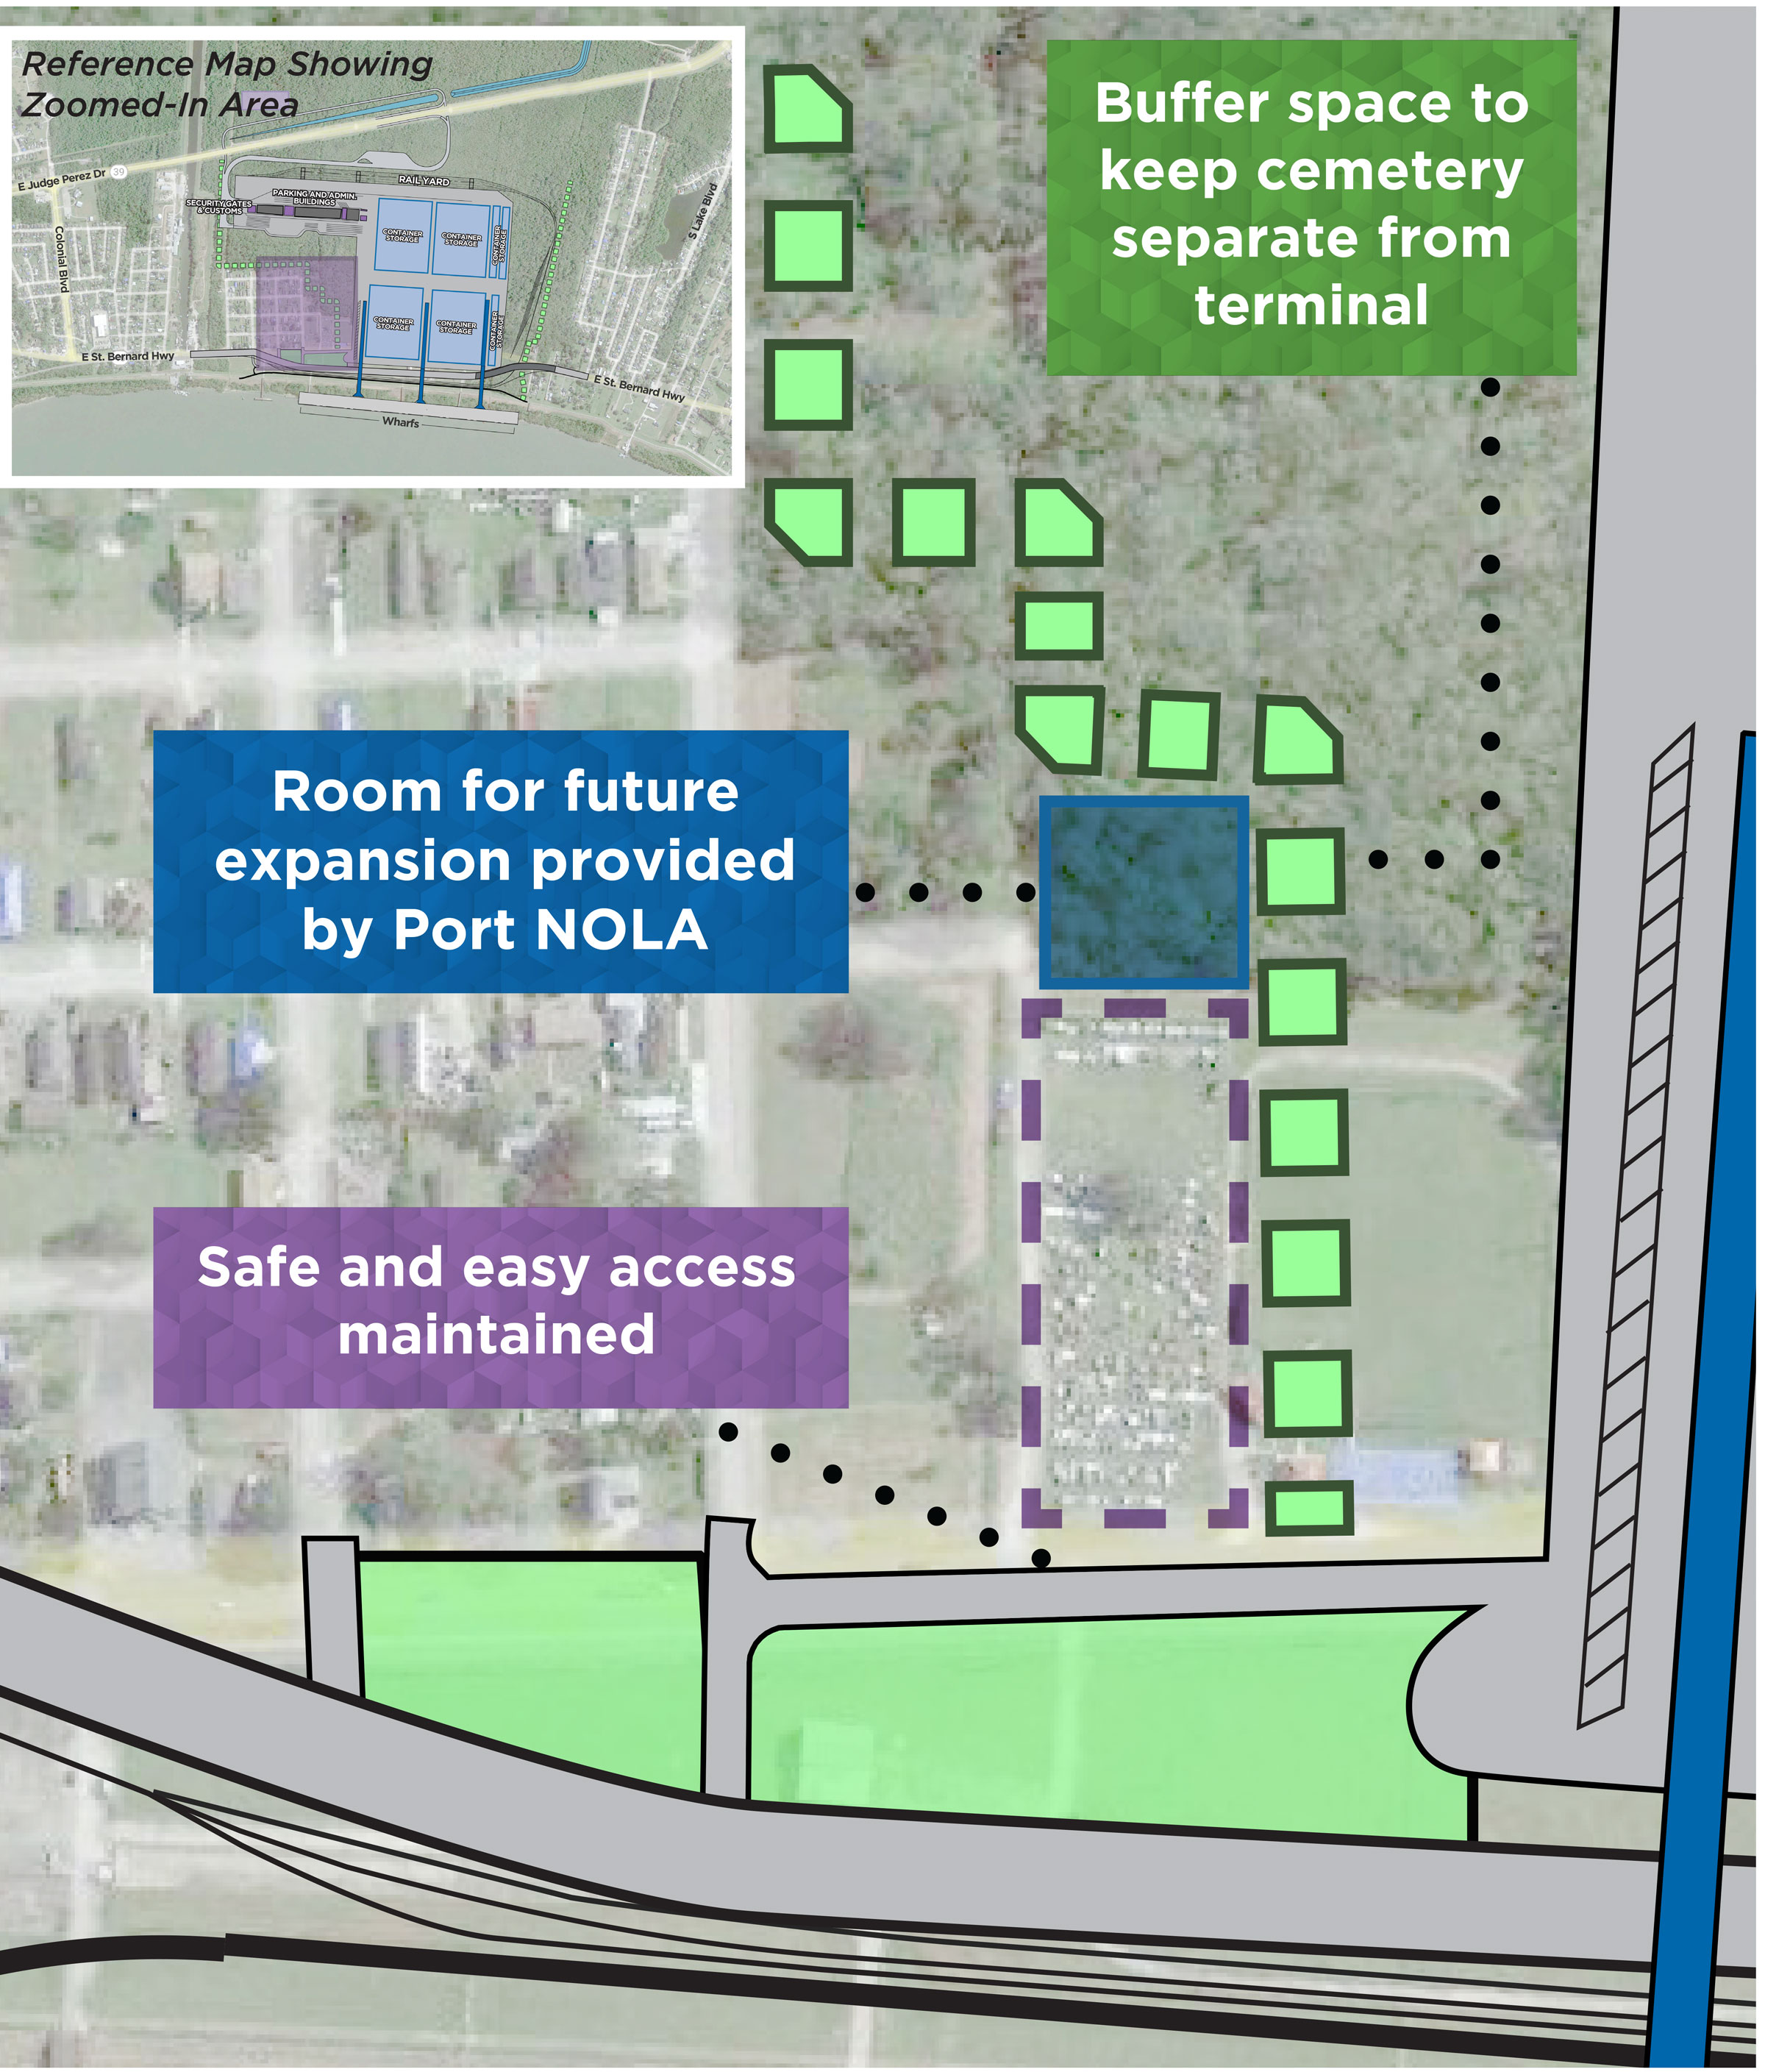 Map of Merrick Cemetery pointing out the access road to the cemetery and undeveloped space around the cemetery once the terminal is under construction and in operation. The map also shows the room for future expansion that Port NOLA will provide on the back side of the cemetery.